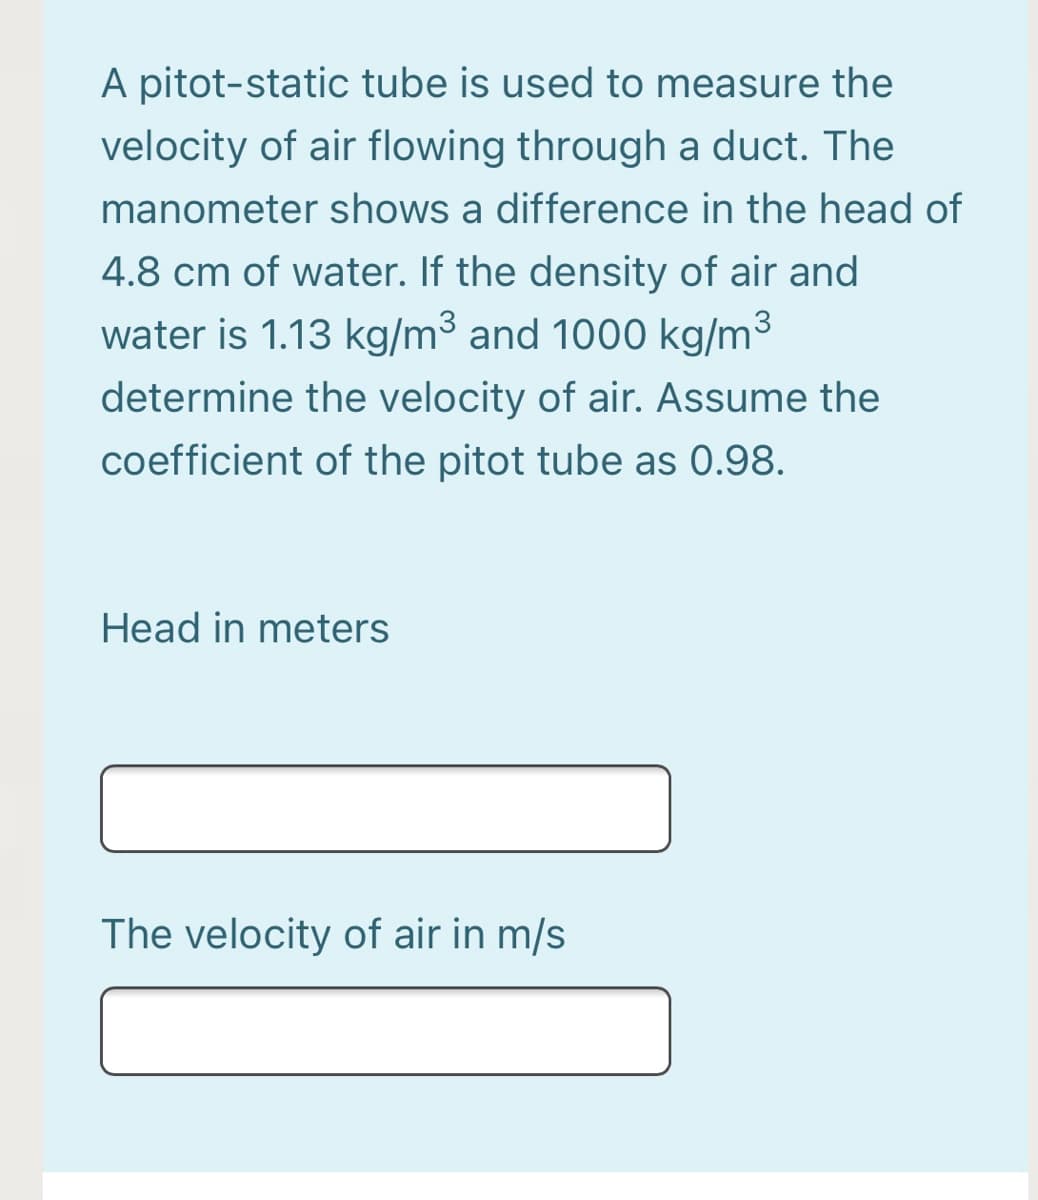 A pitot-static tube is used to measure the
velocity of air flowing through a duct. The
manometer shows a difference in the head of
4.8 cm of water. If the density of air and
water is 1.13 kg/m3 and 1000 kg/m3
determine the velocity of air. Assume the
coefficient of the pitot tube as 0.98.
Head in meters
The velocity of air in m/s
